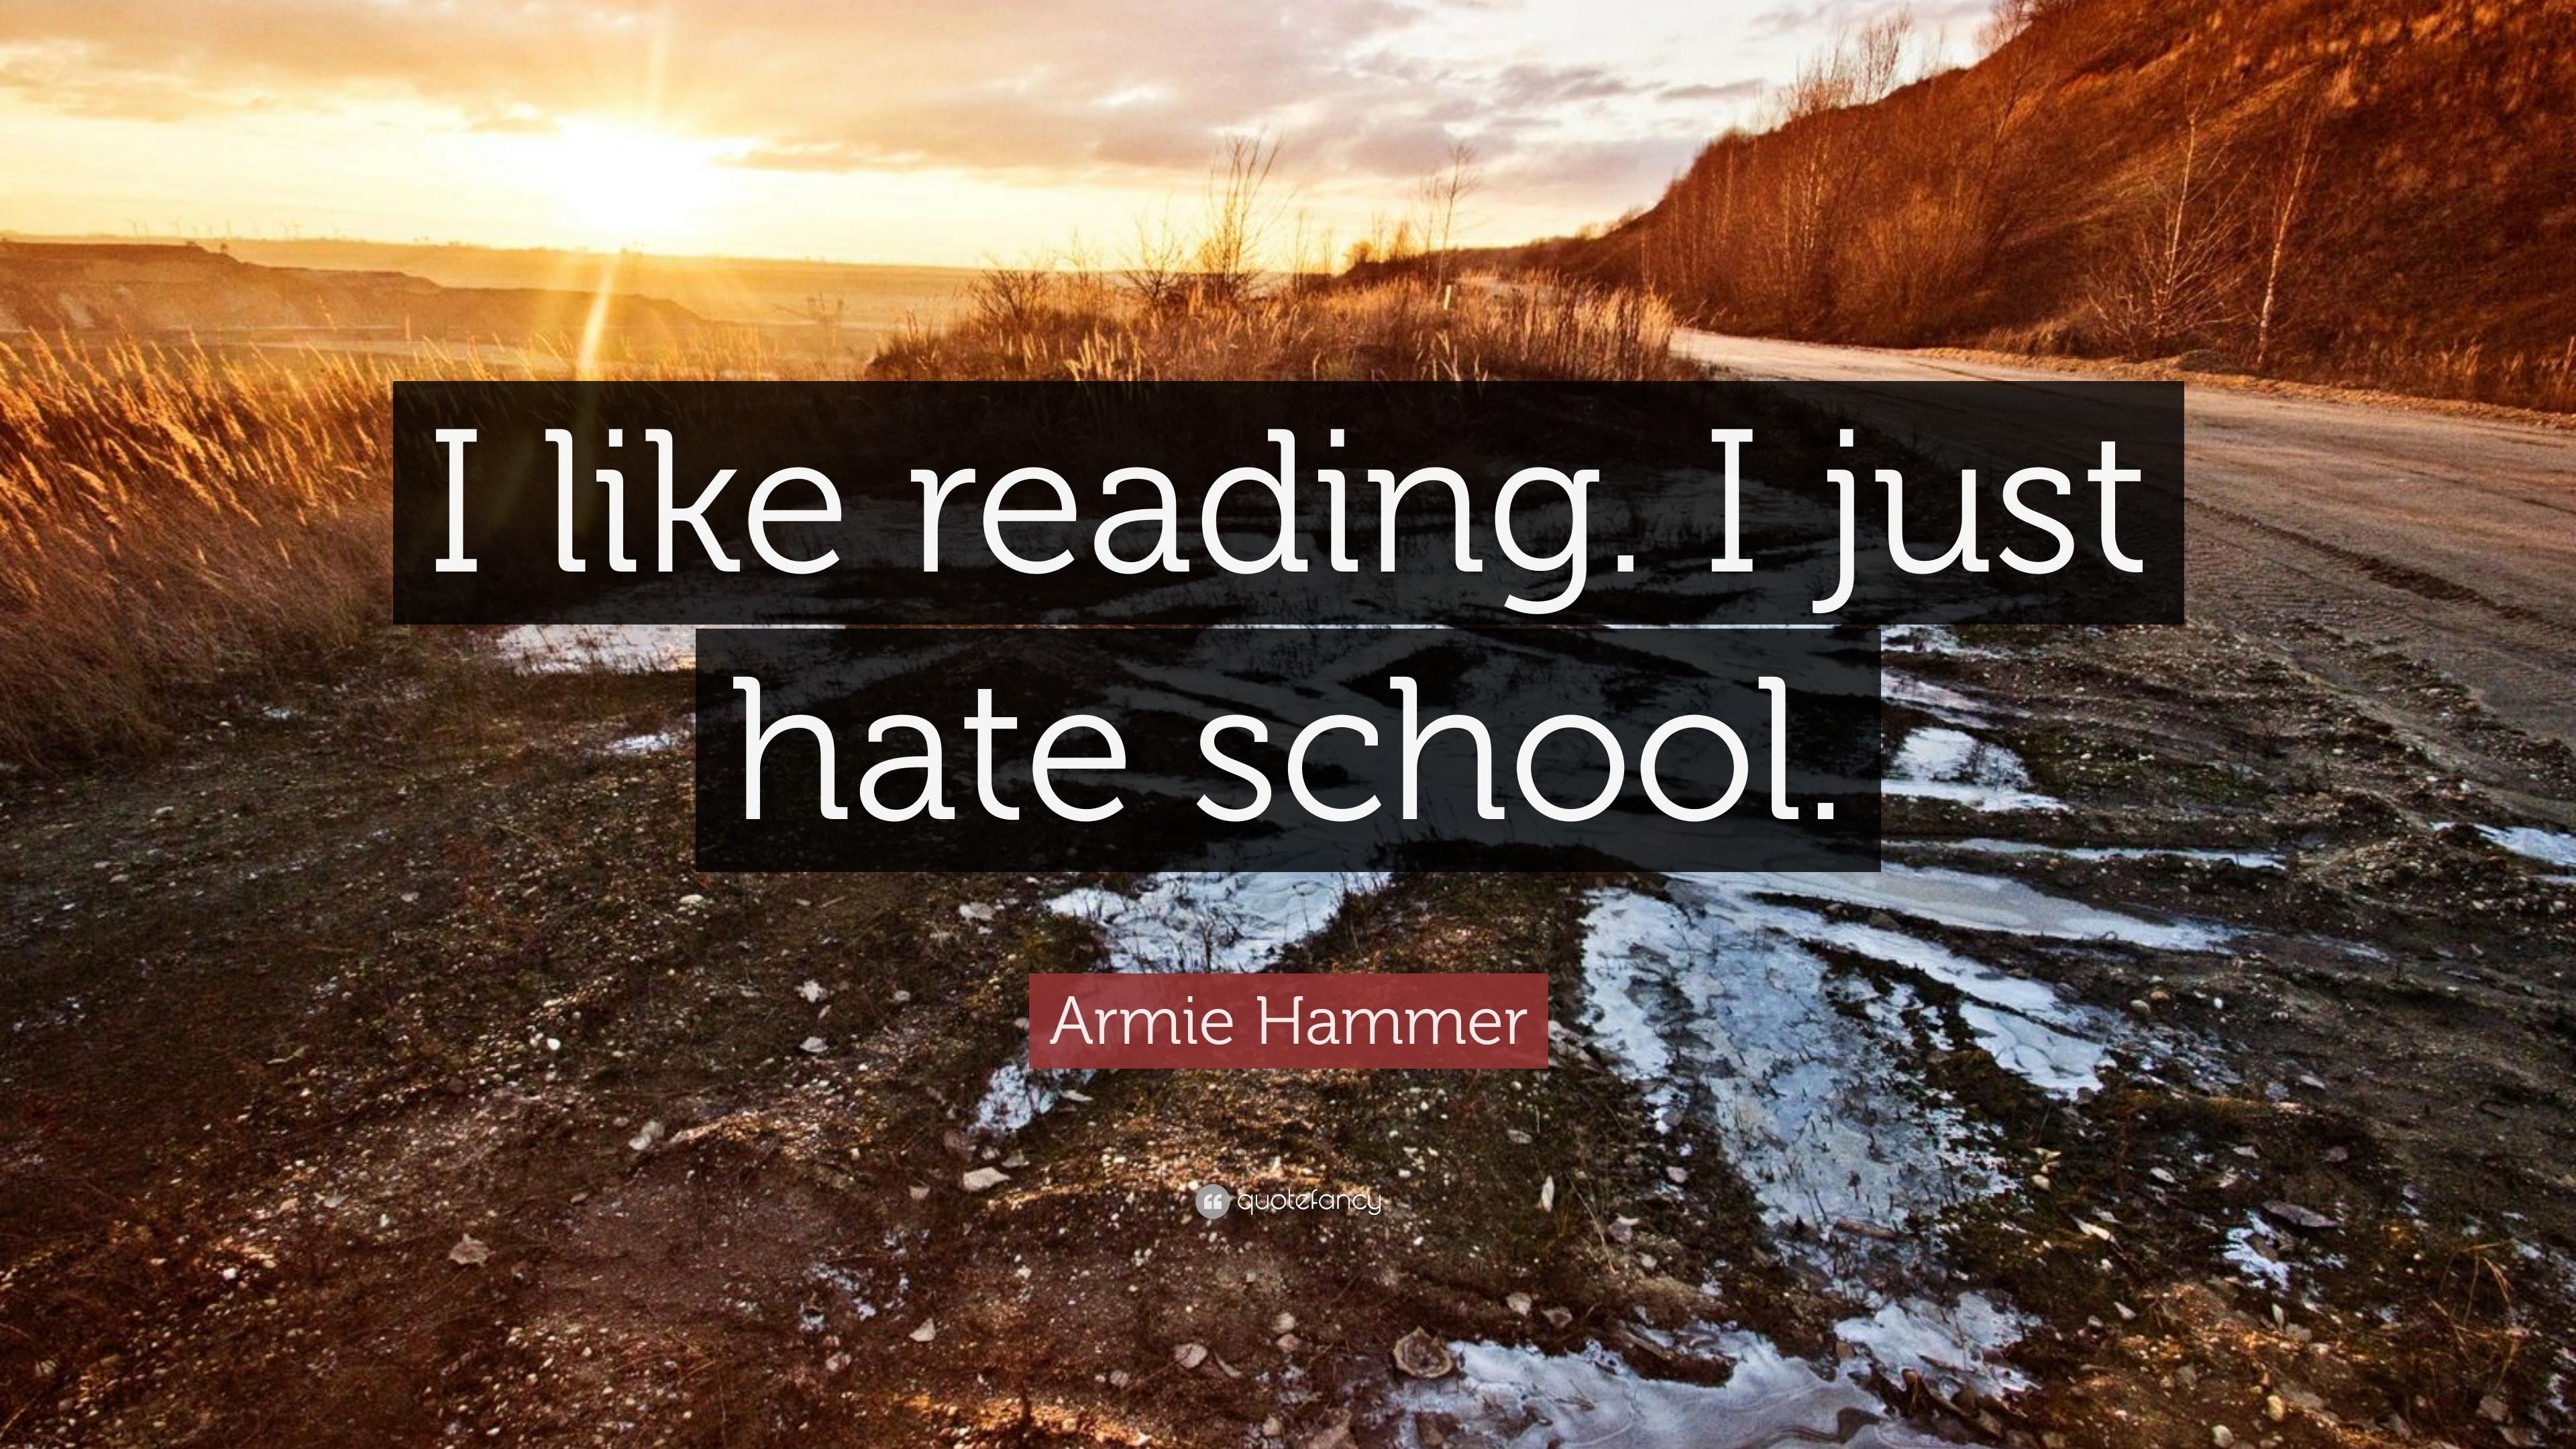 Armie Hammer Quote: “I like reading. I just hate school